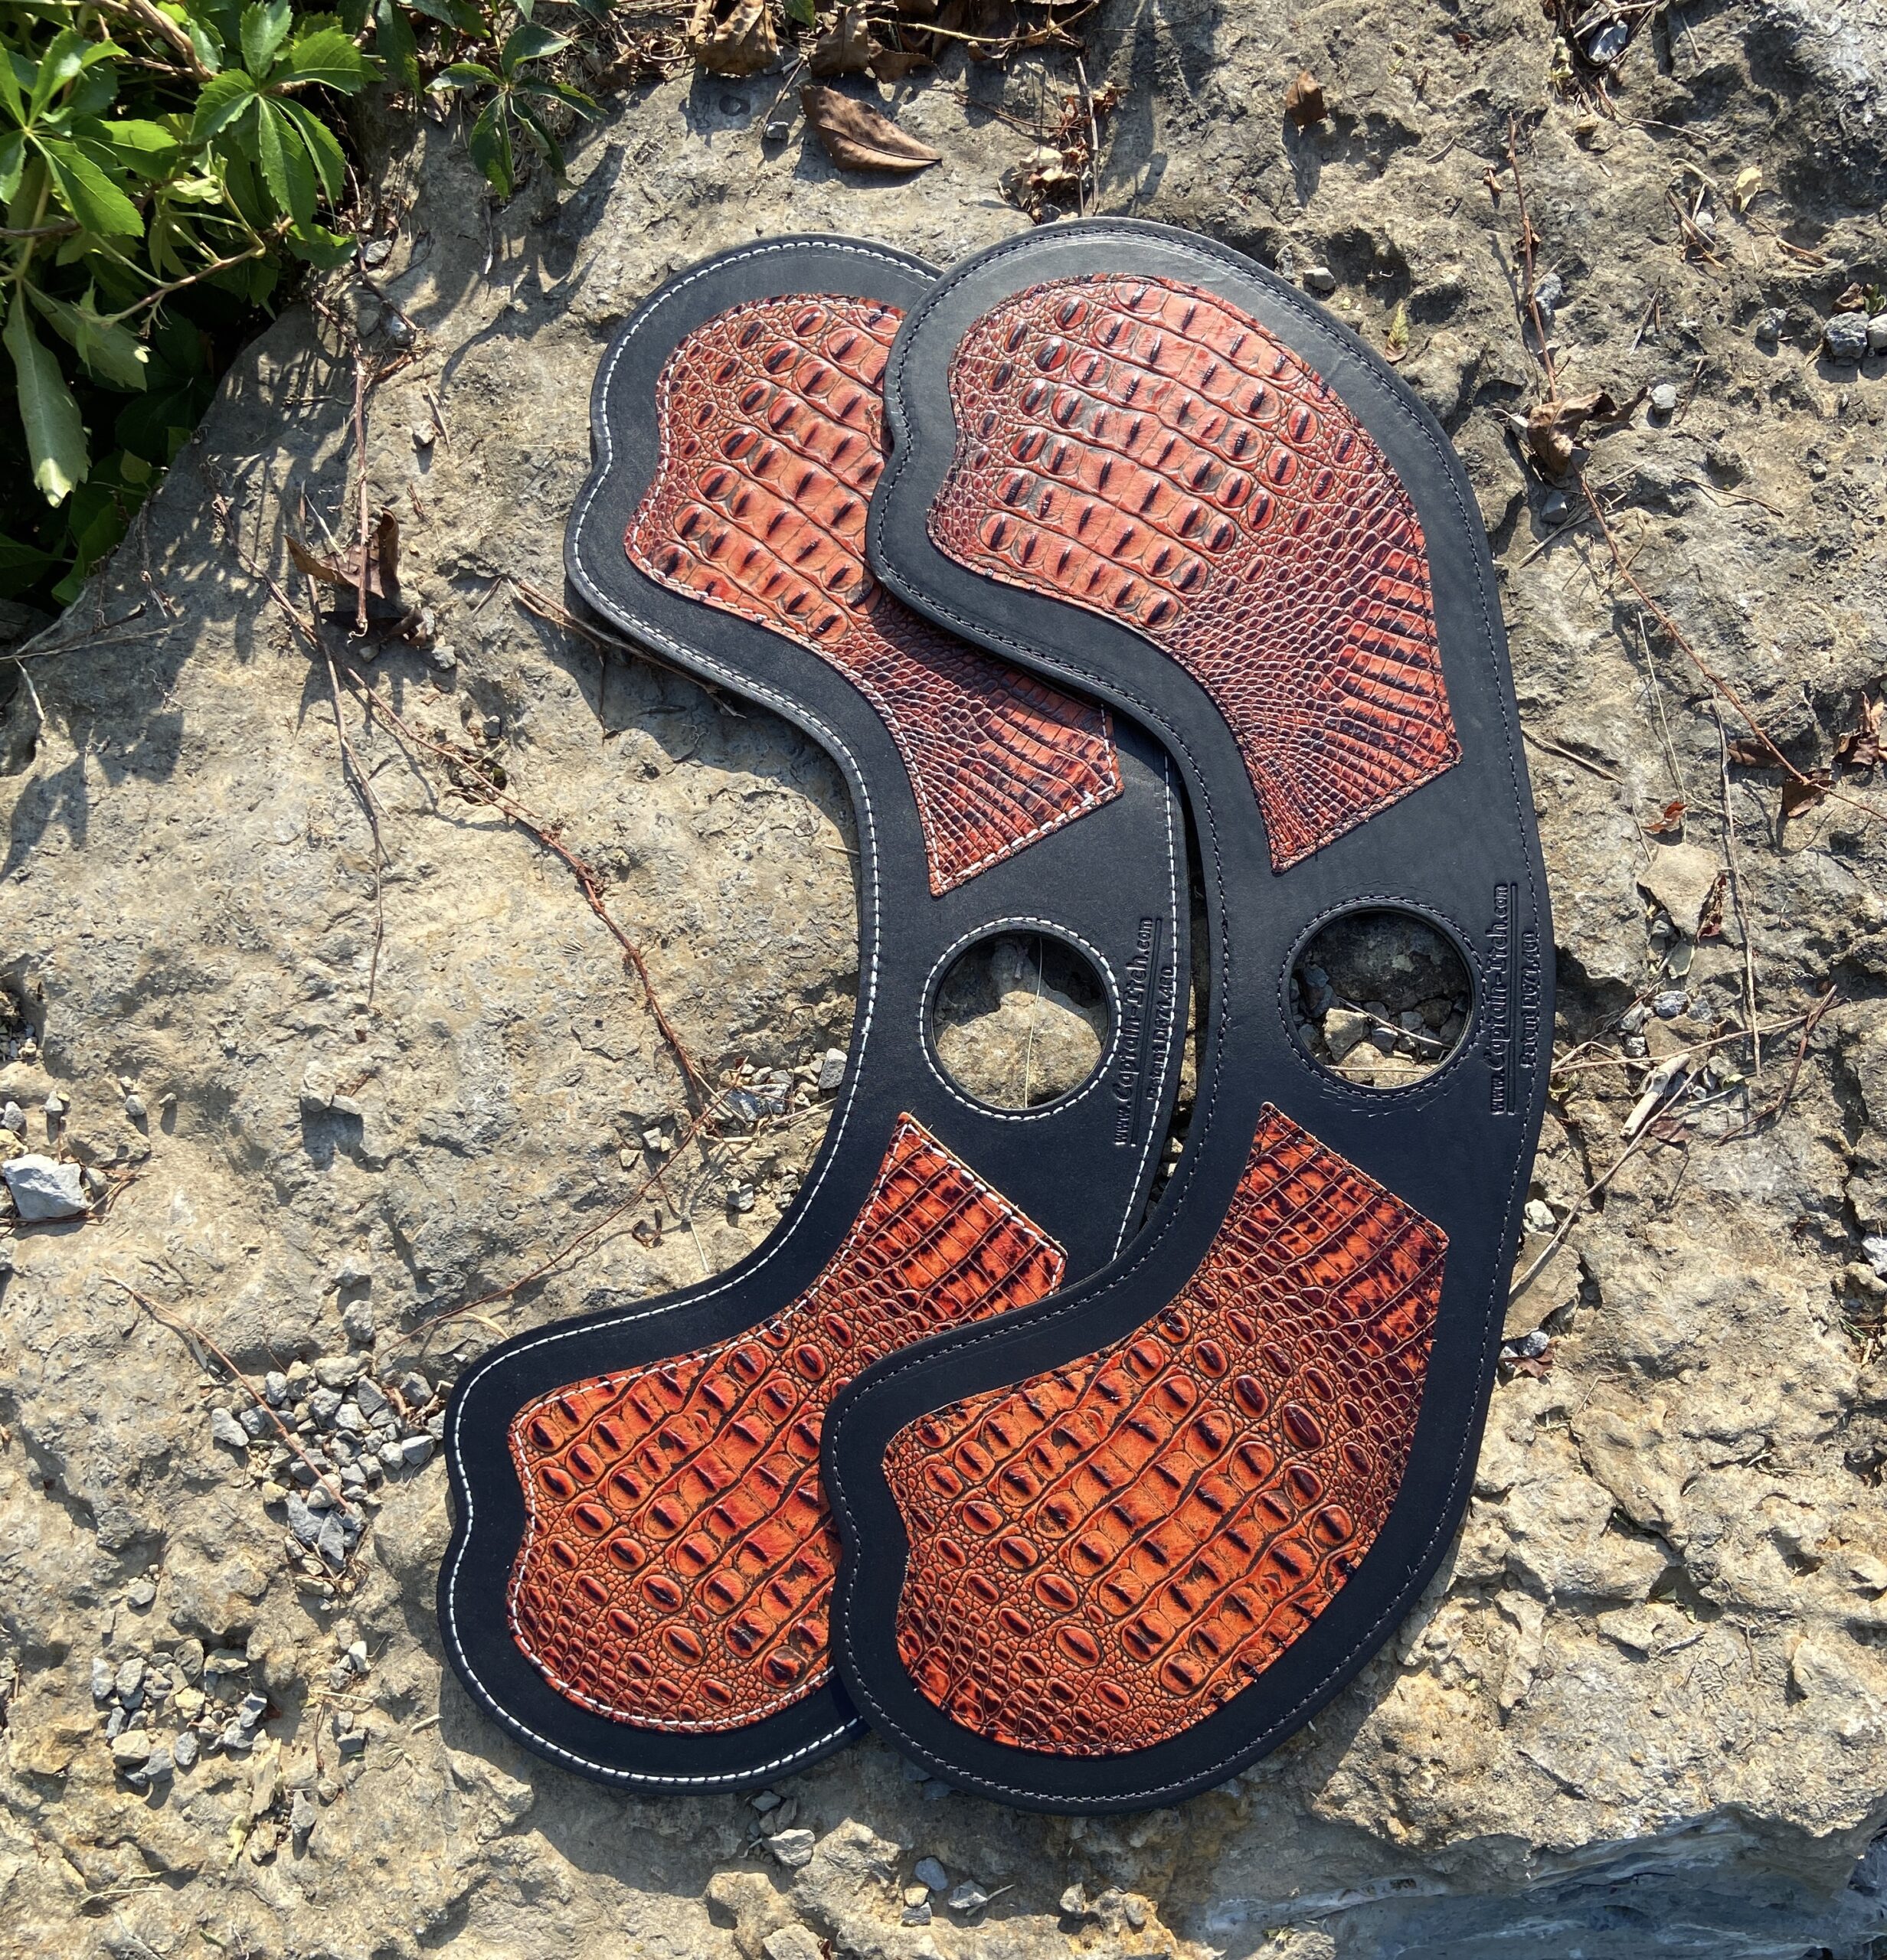 Scout heat shield with orange glow alligator embossed leather